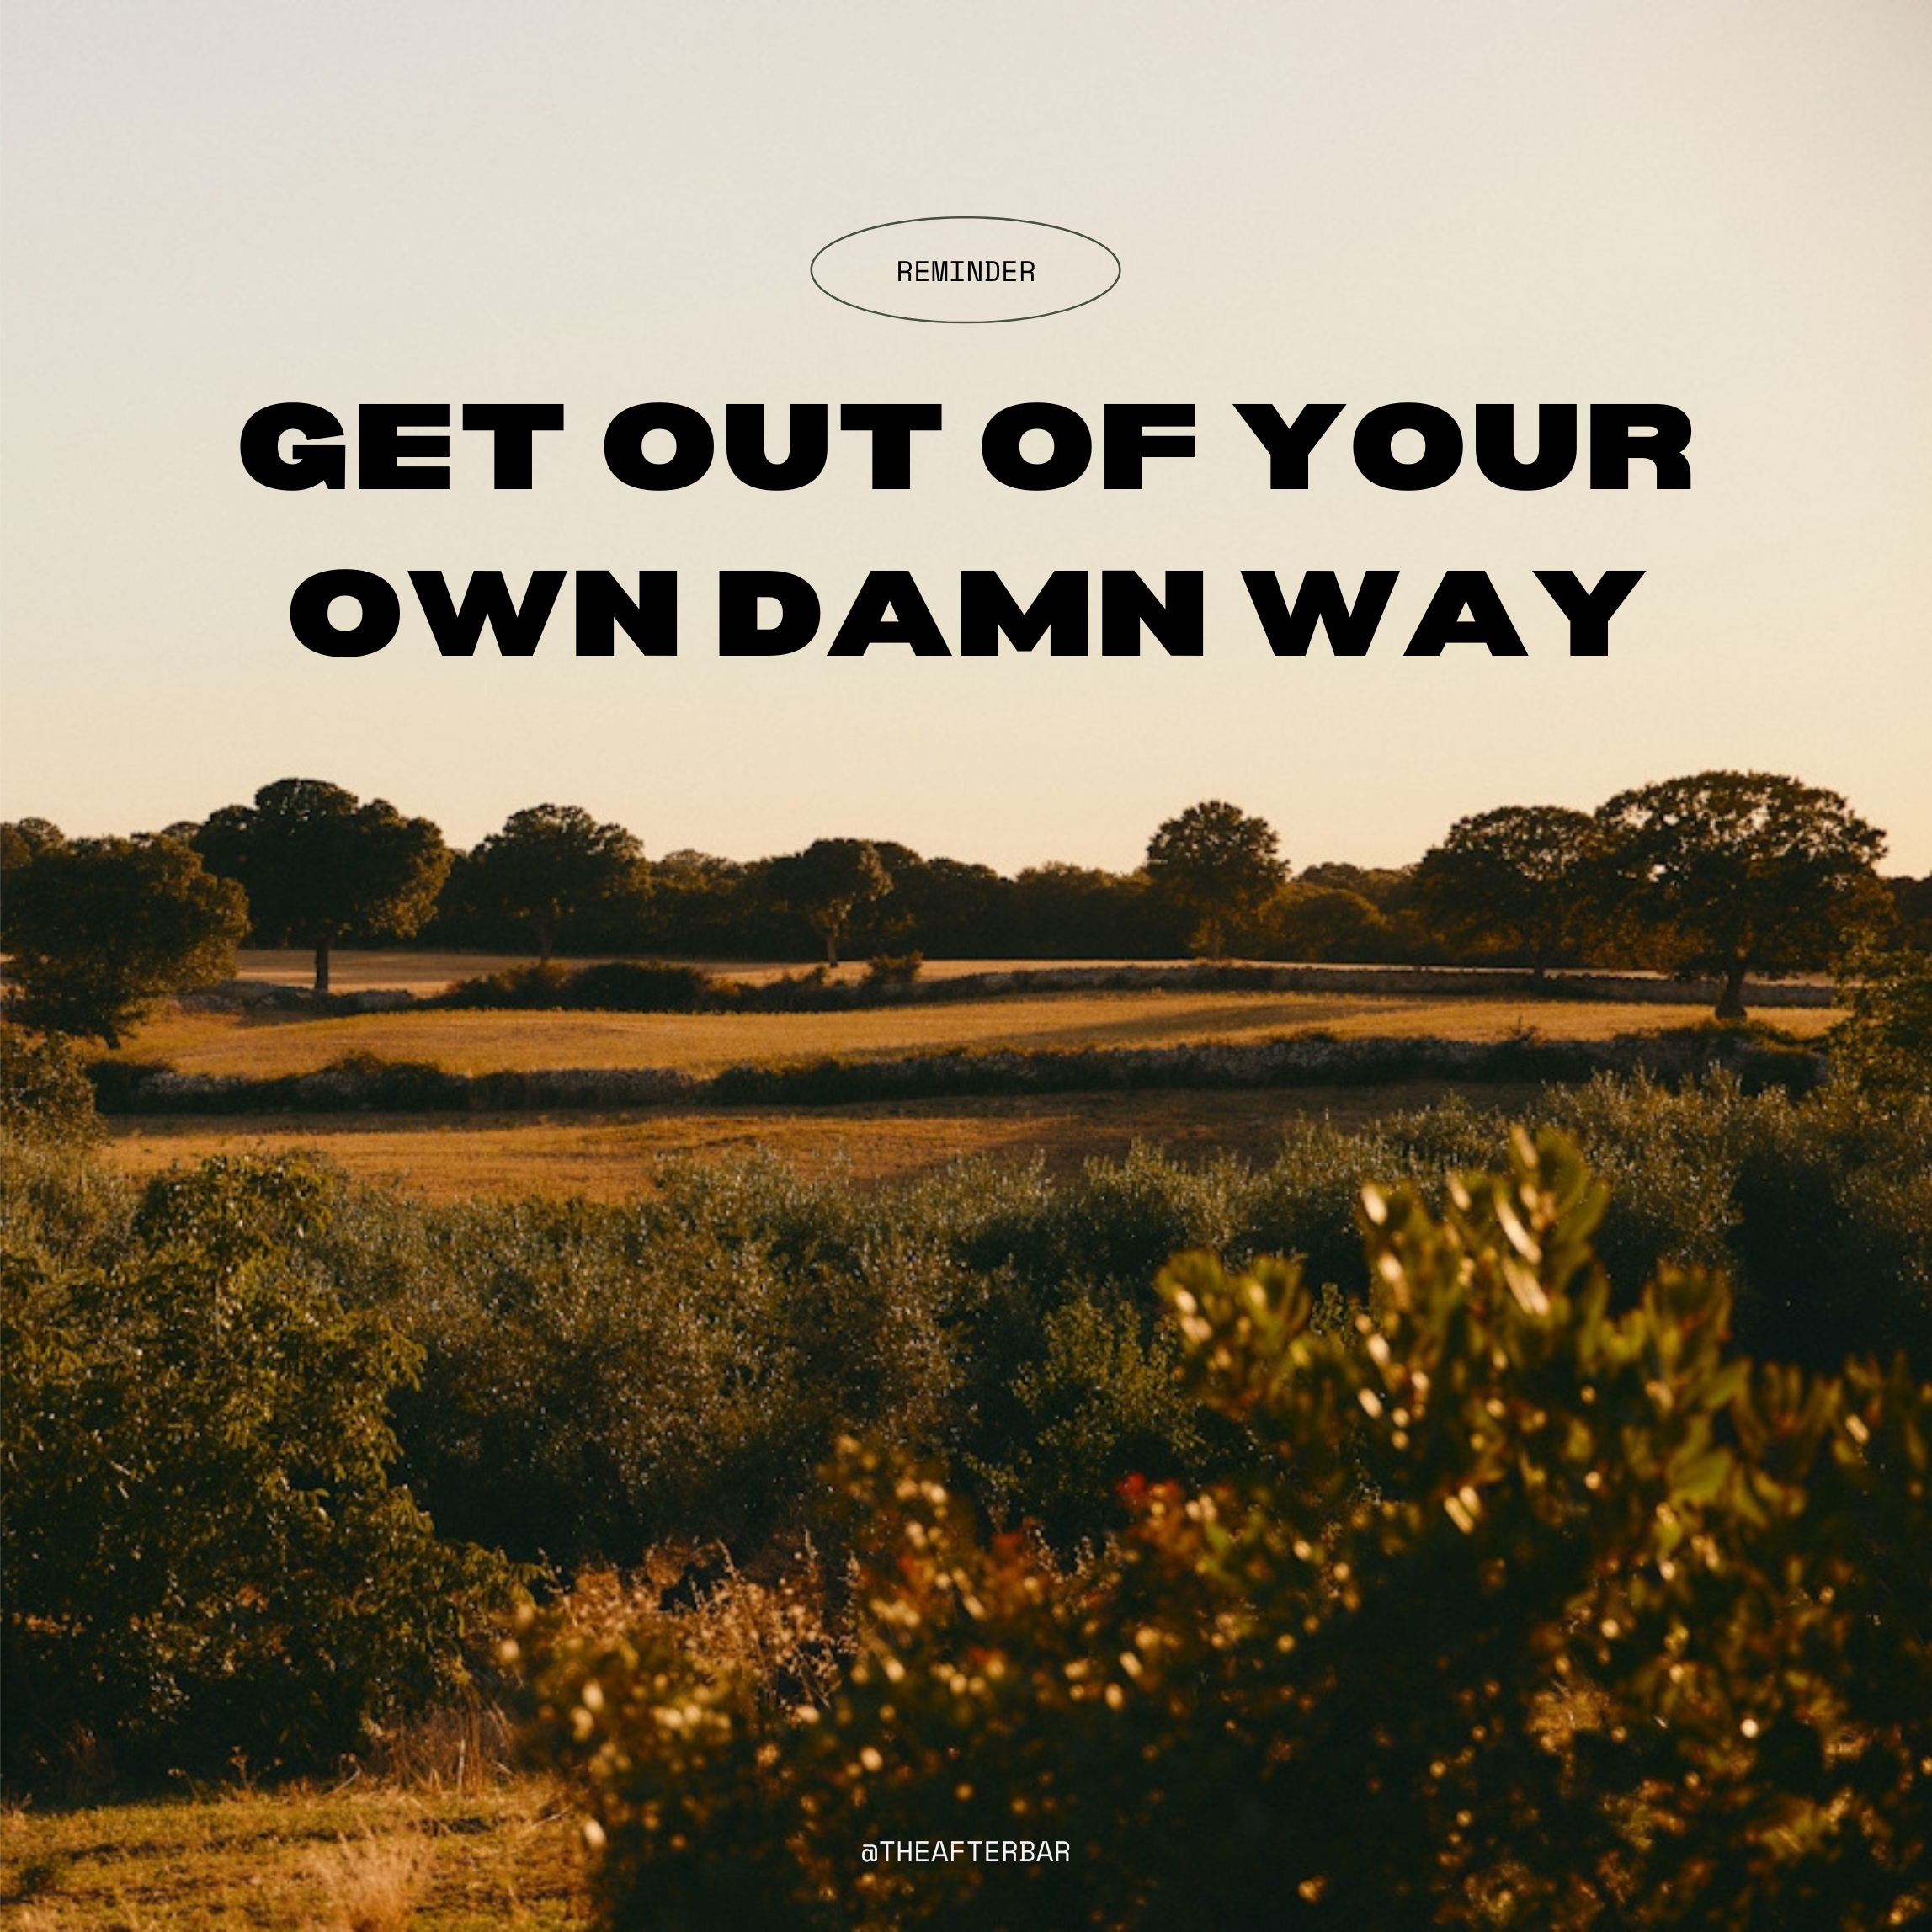 Get out of your own damn way: 10 tips to stop holding yourself back from greatness.